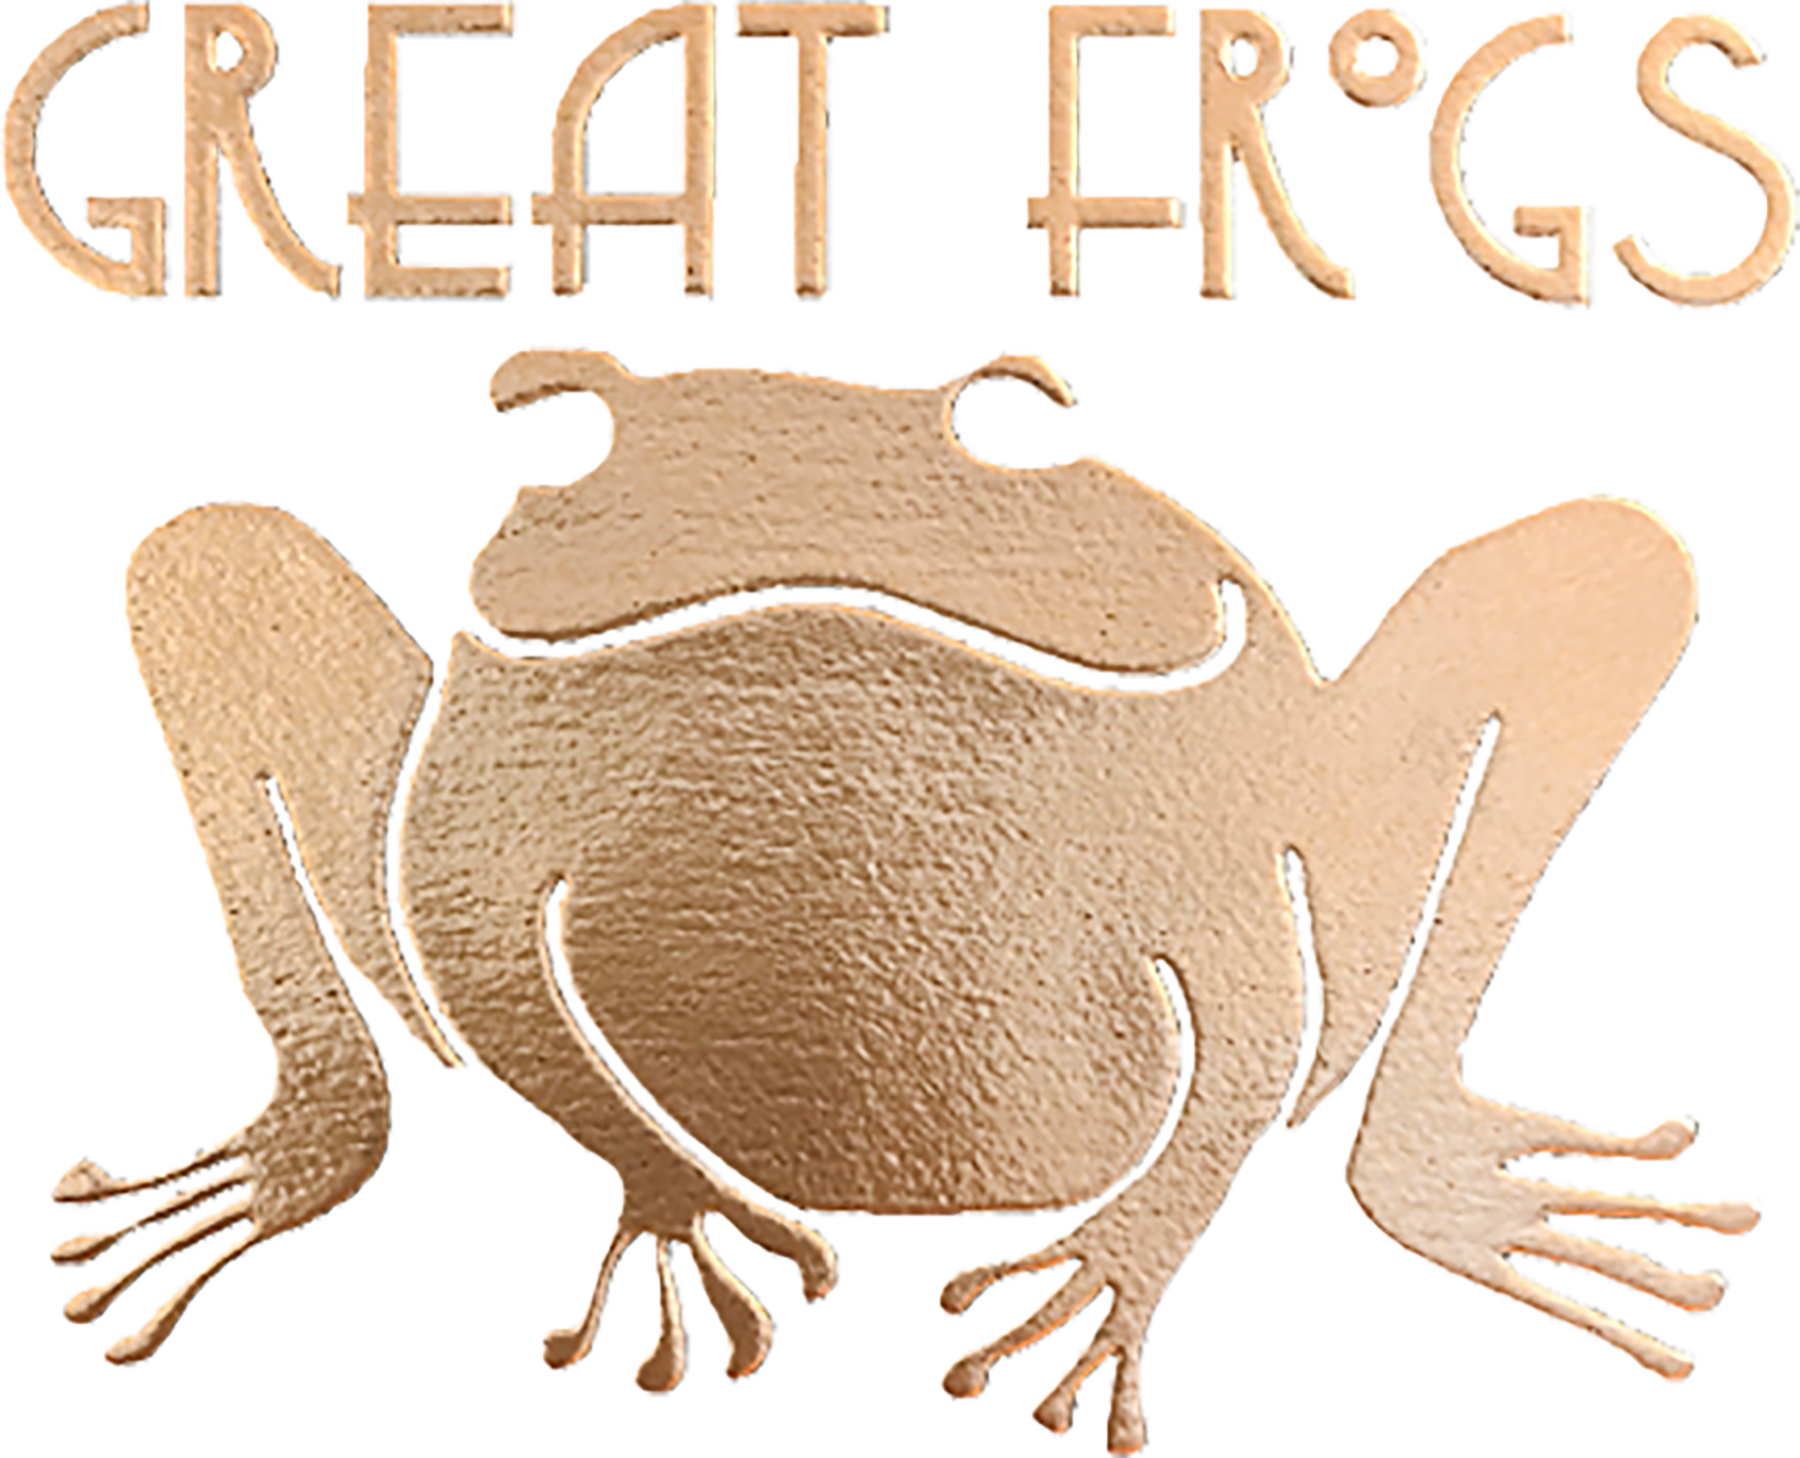 Great Frogs Winery